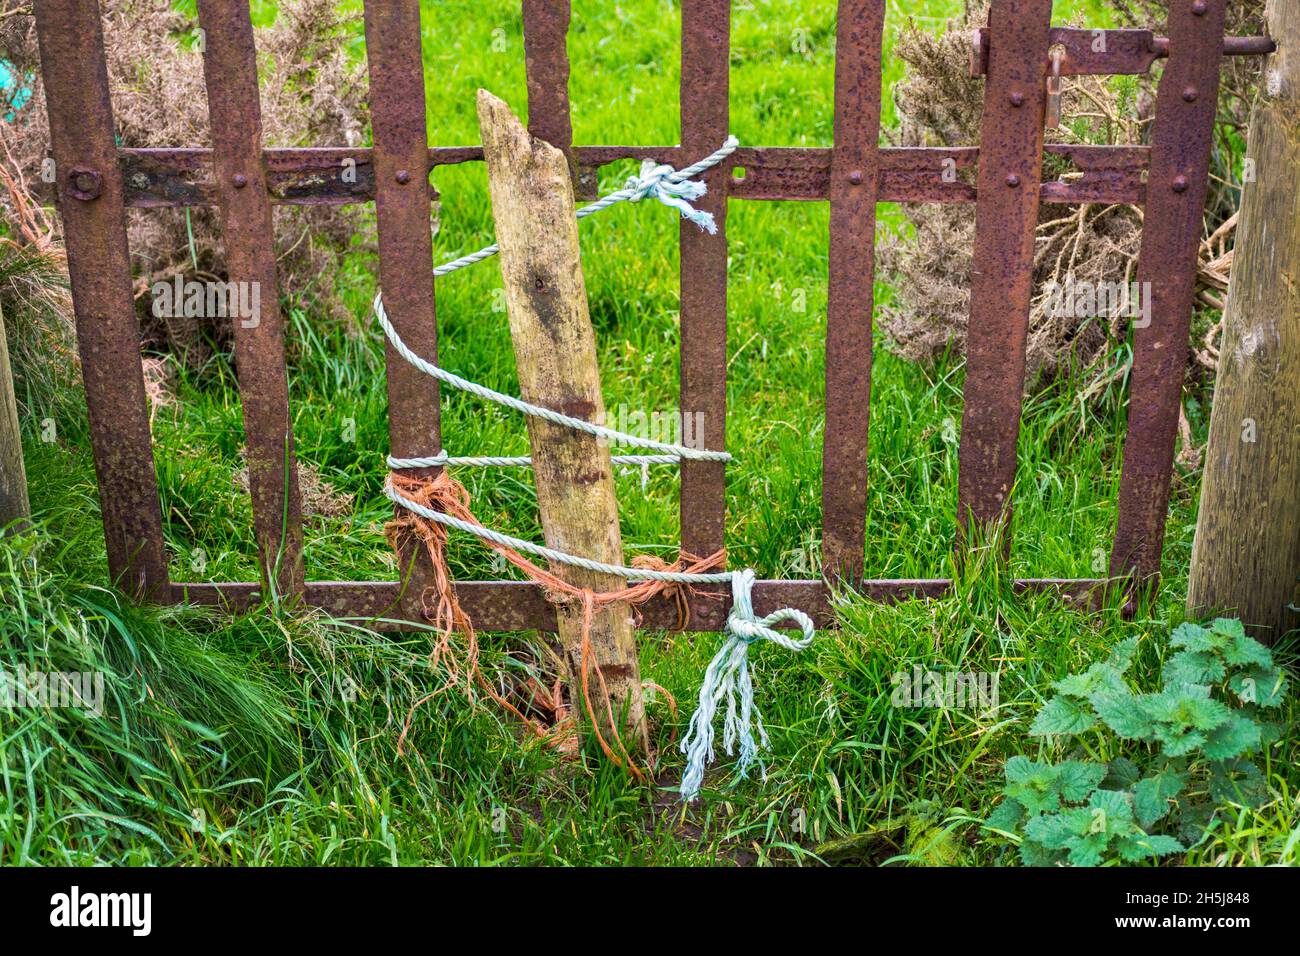 Gate repairs, County Donegal, Ireland. Stock Photo